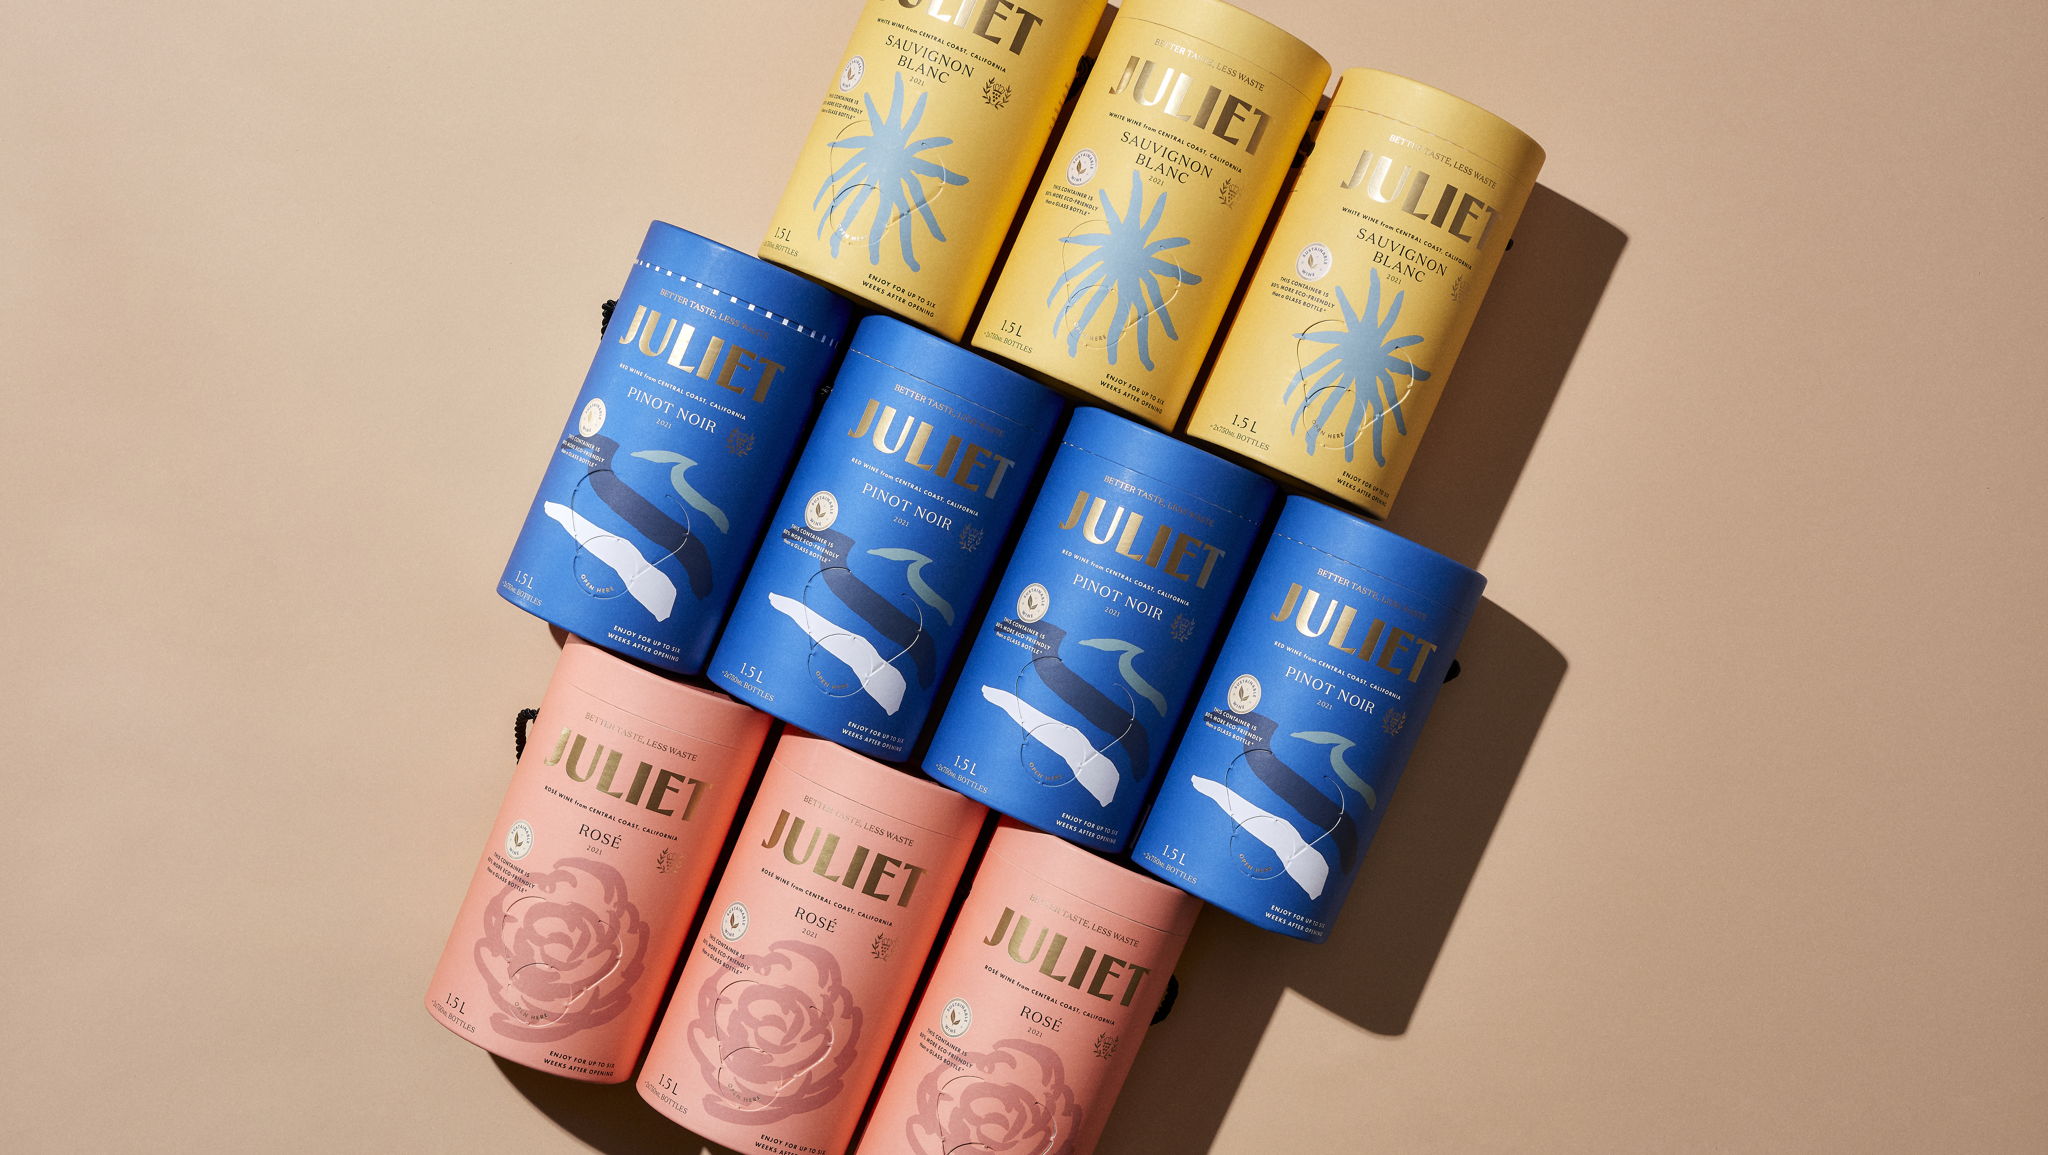 Juliet Infuses The Mediterranean Lifestyle Into Its Cylindrical Boxed Wines